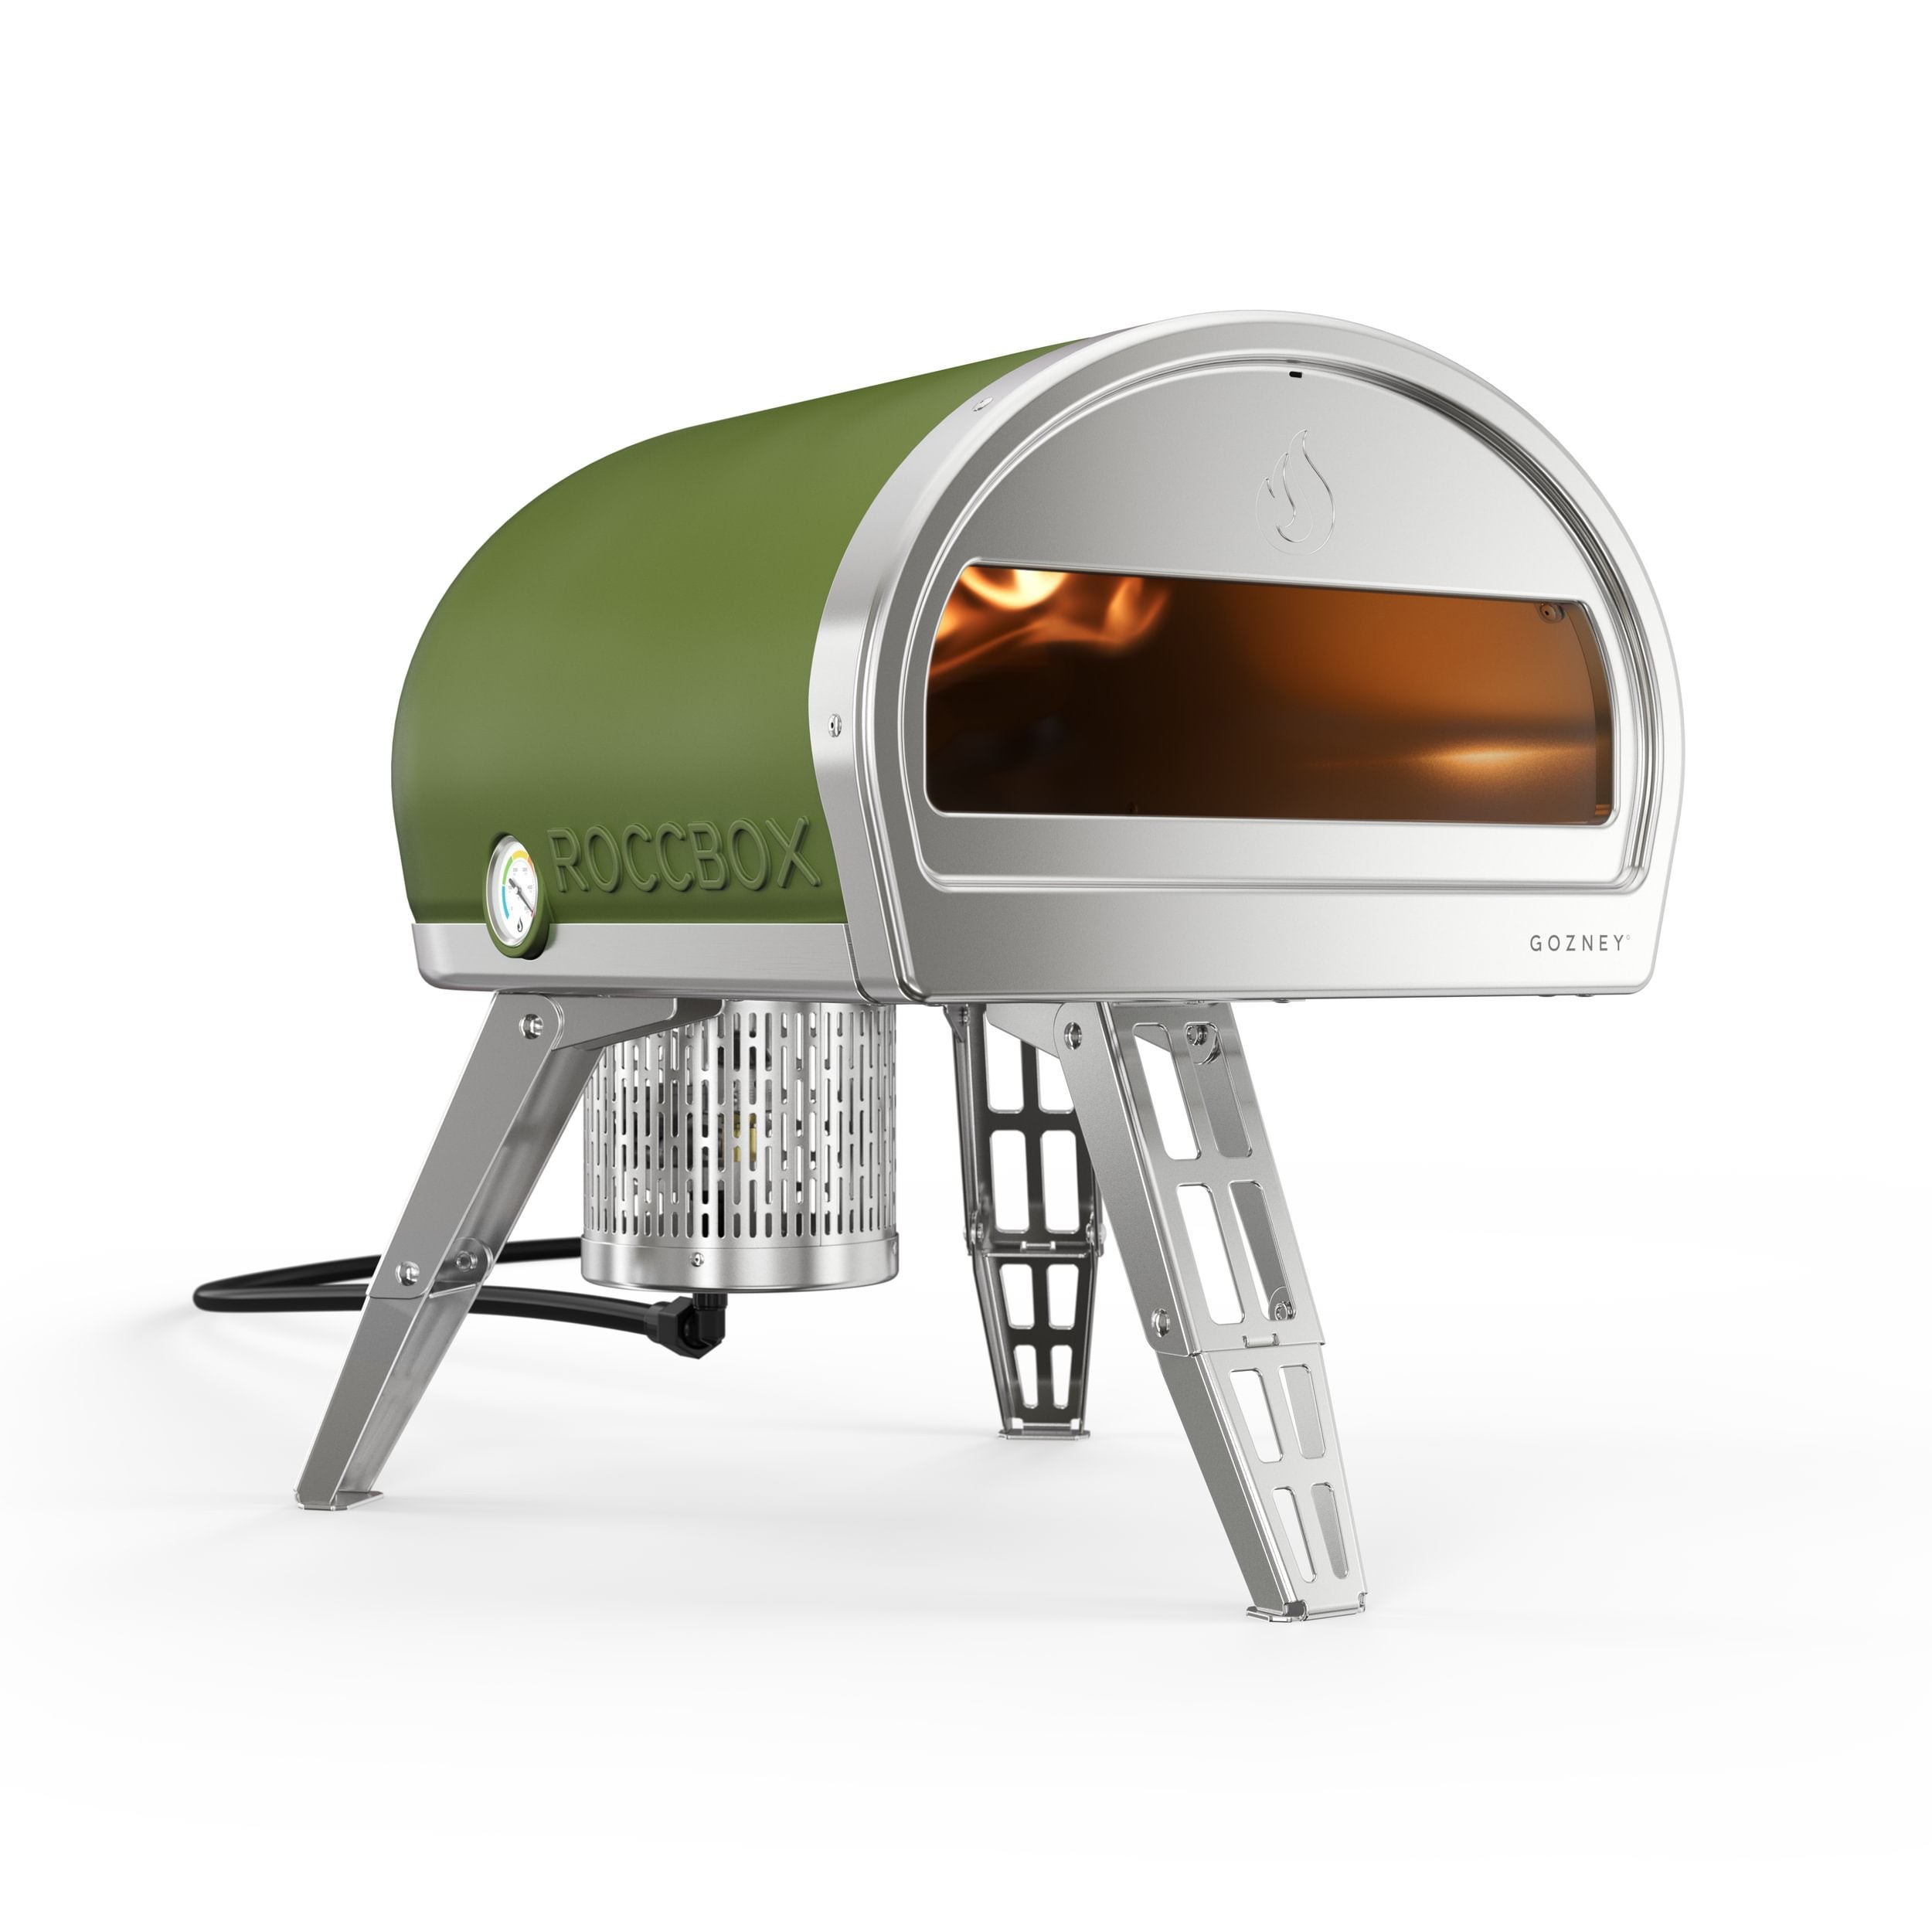 Roccbox Gas Burning Pizza Oven Olive